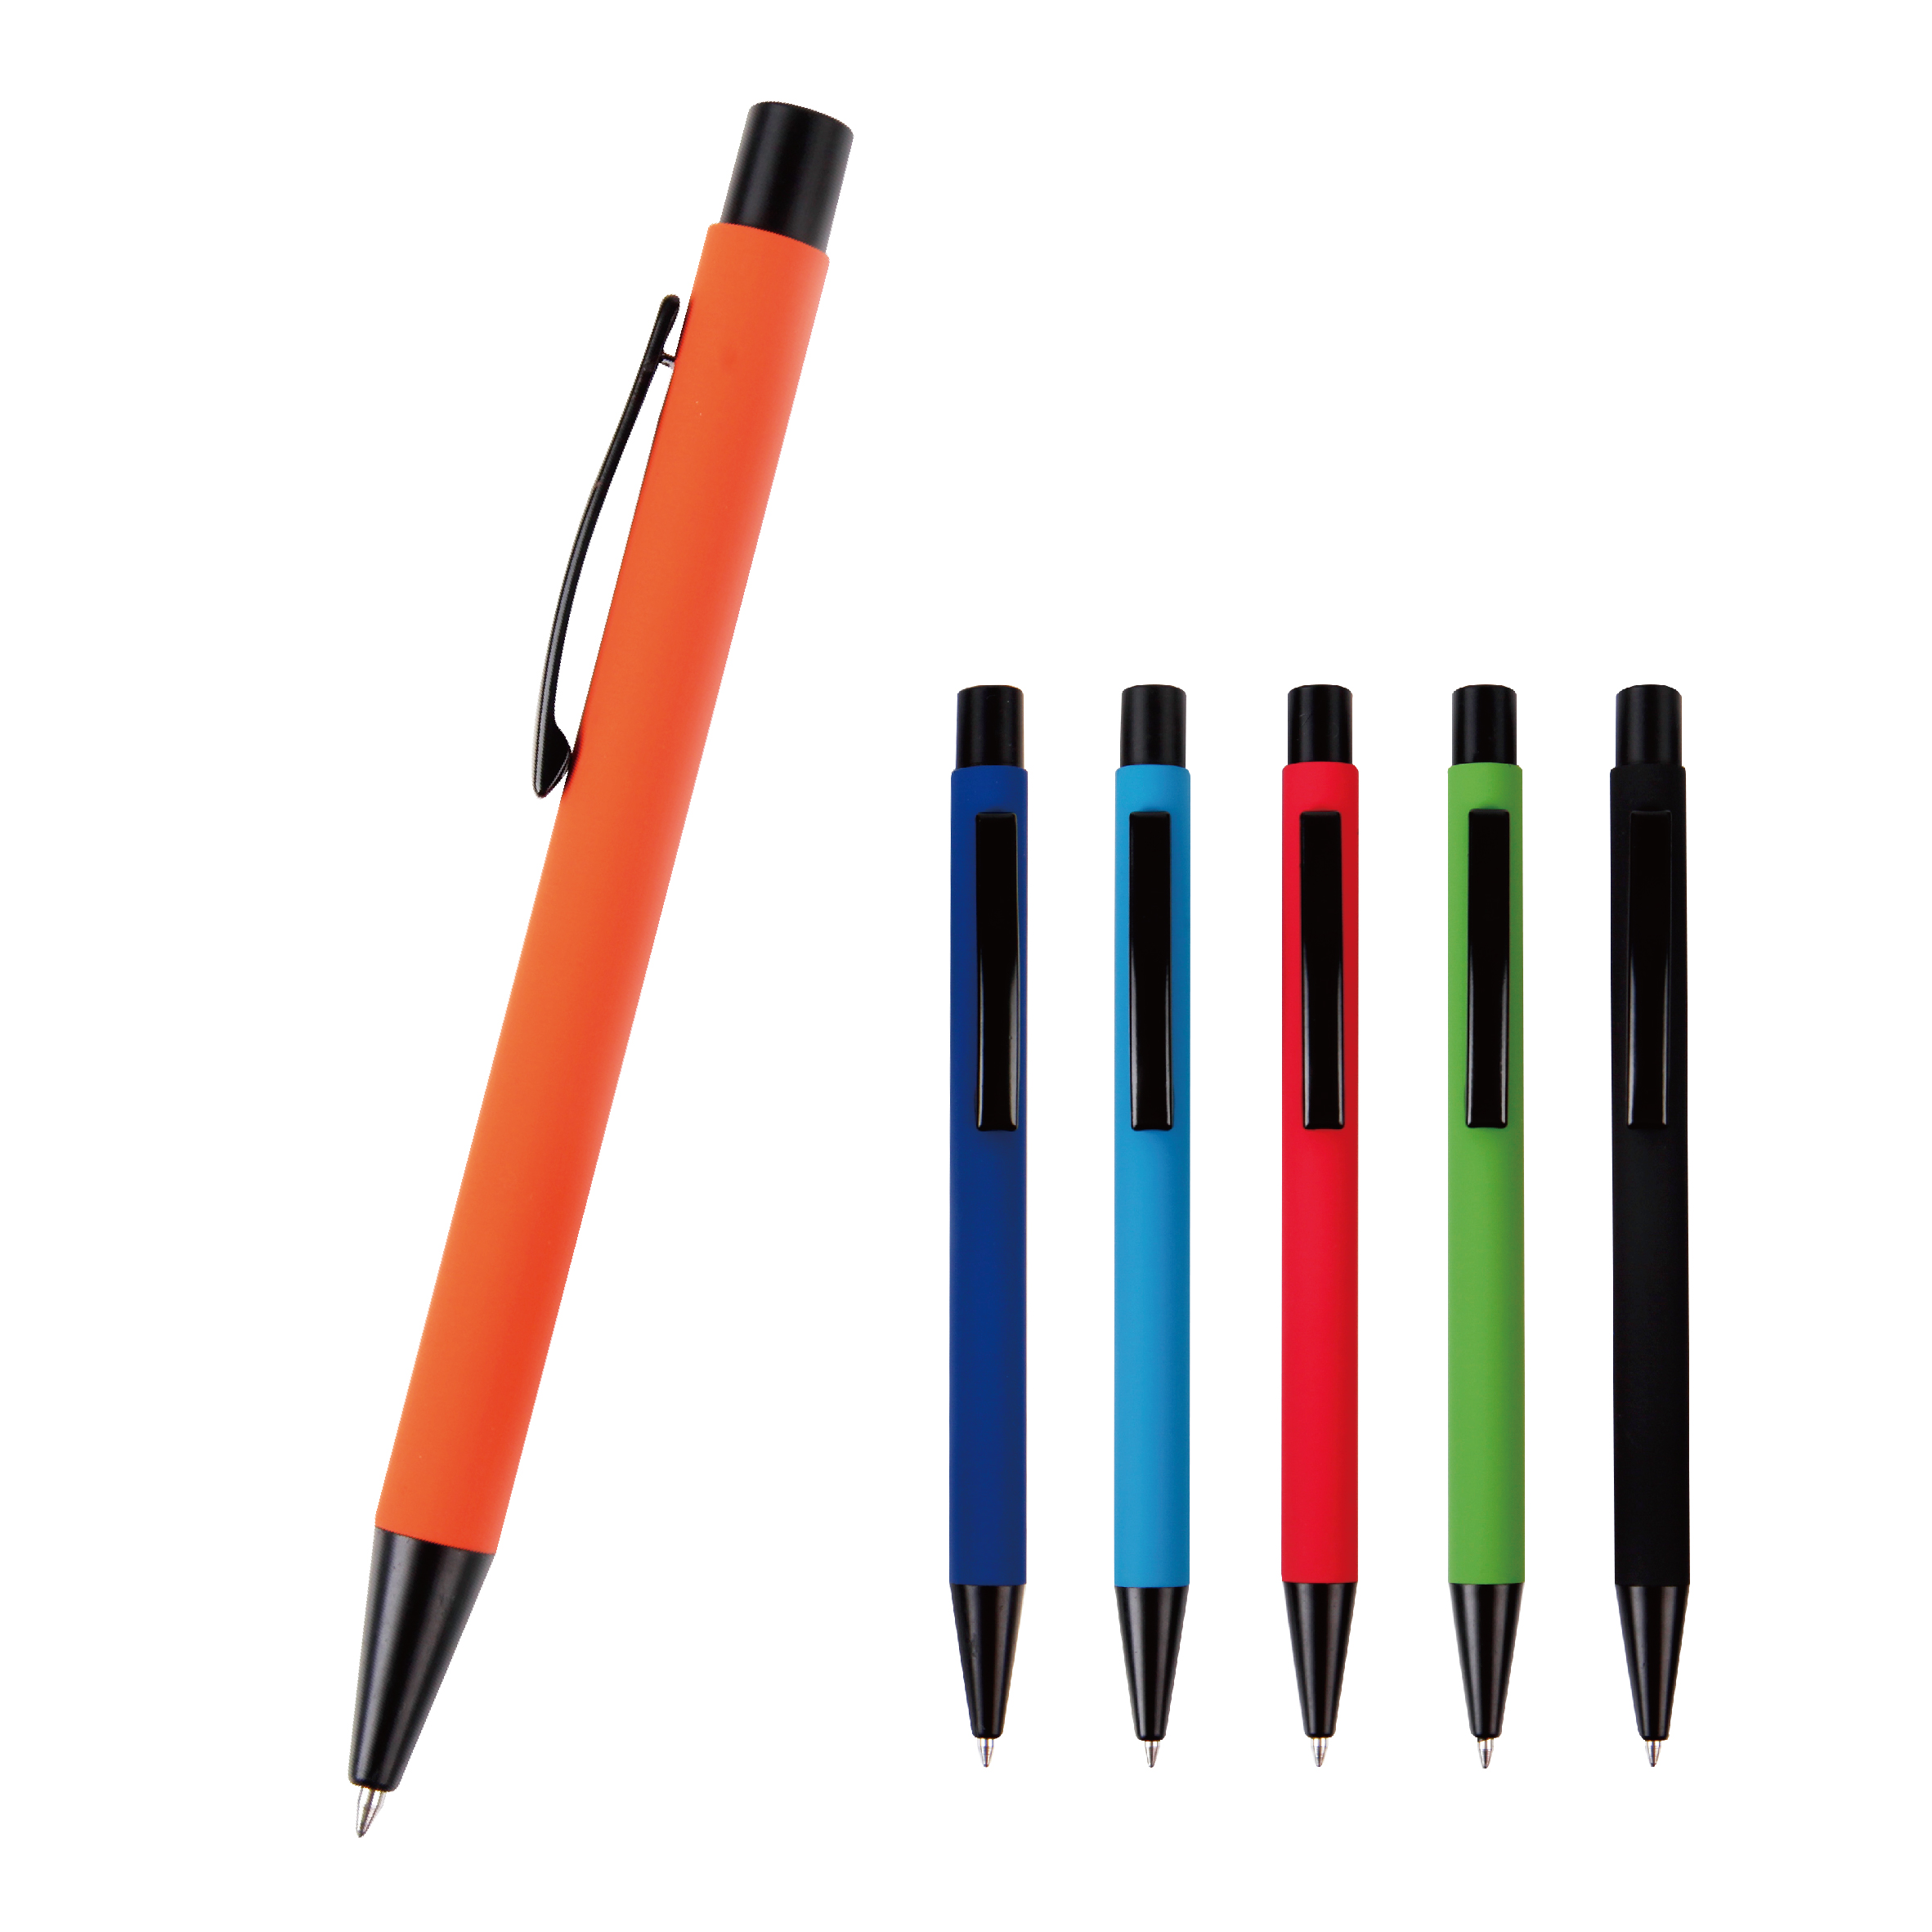 0.7mm/1.0mm Retractable Ball Pen With Metal Clip for School Office